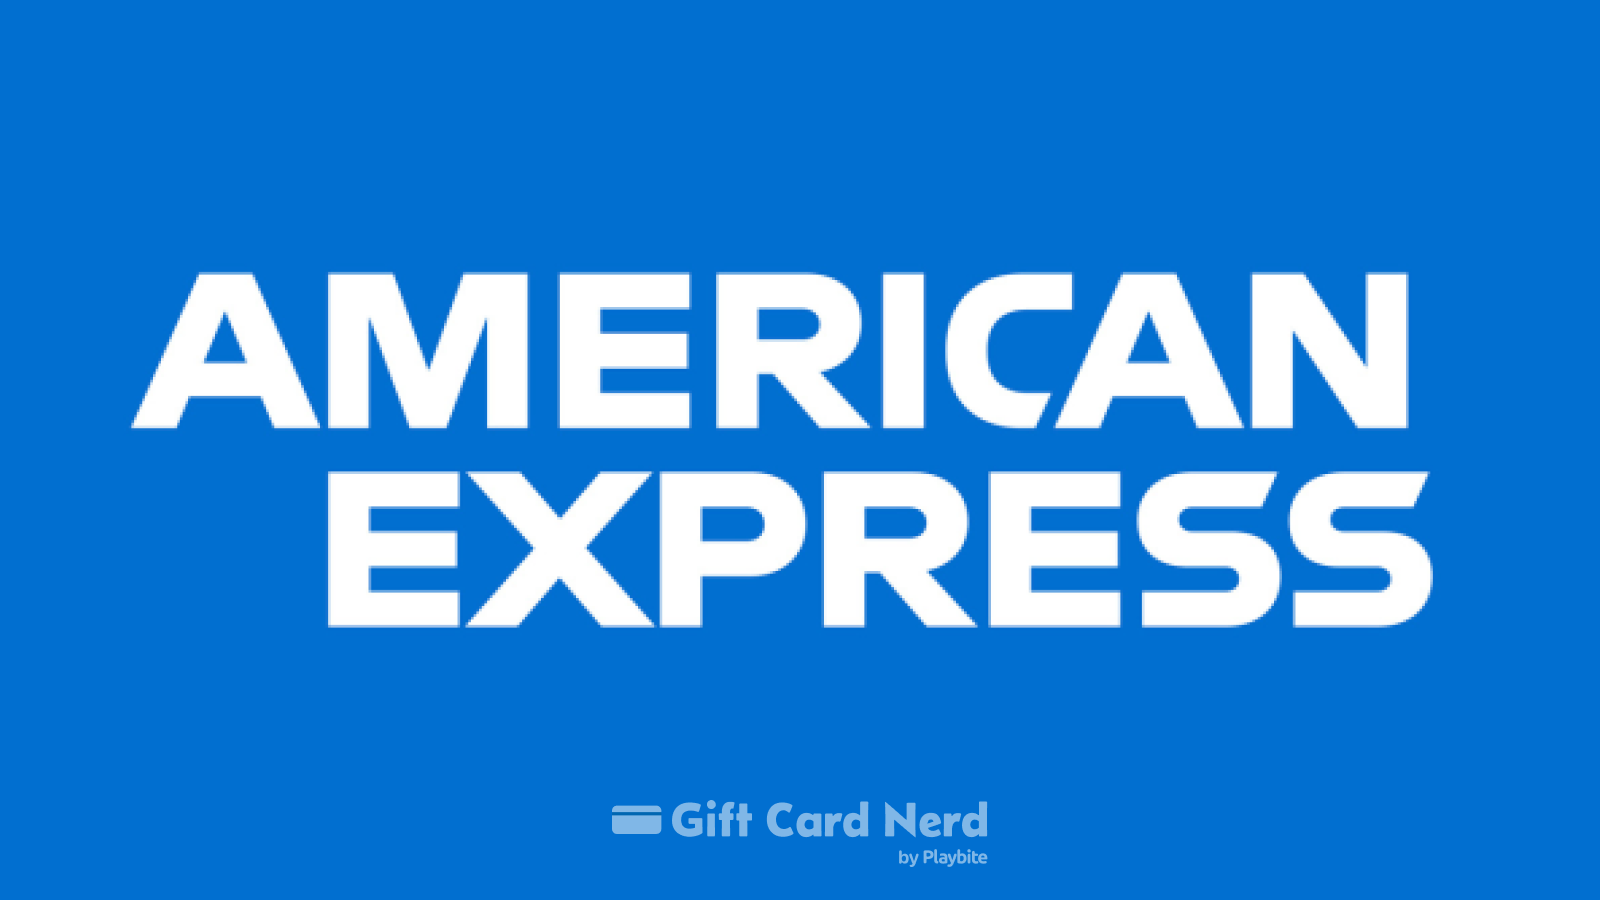 Can I Use an Amex Gift Card on Paypal?